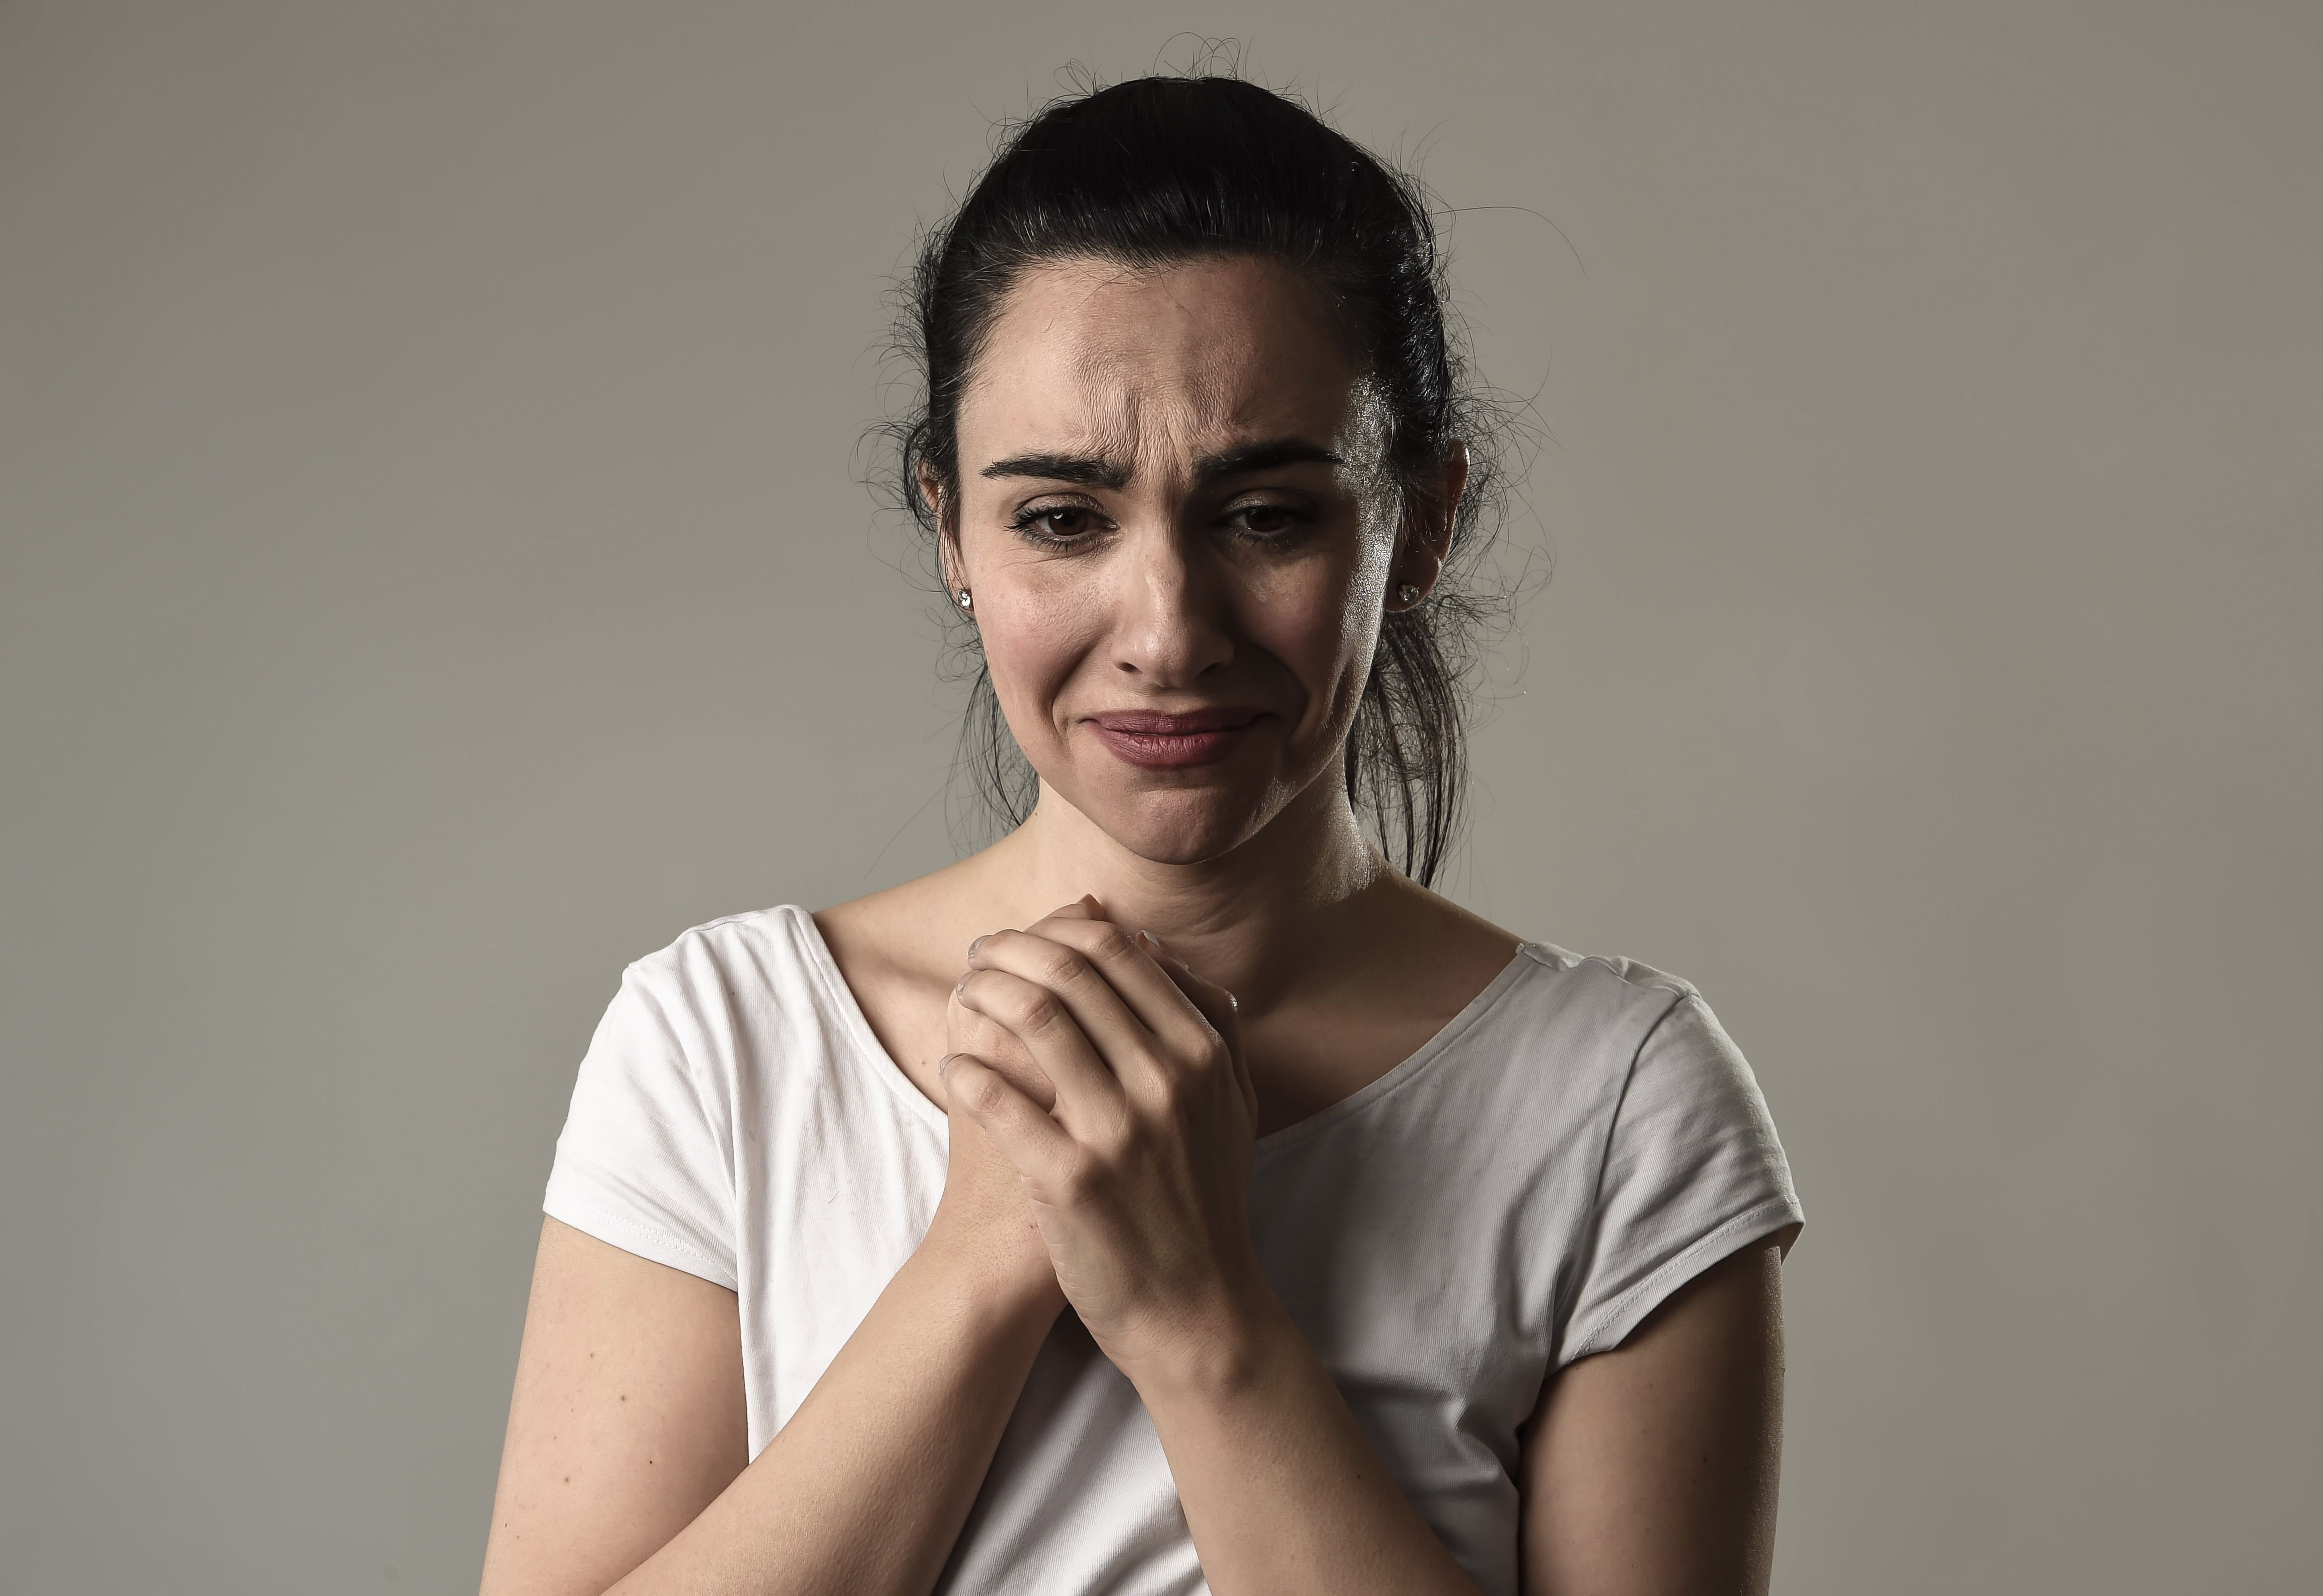 A woman clasps her hand together in tears. | Source: Shutterstock